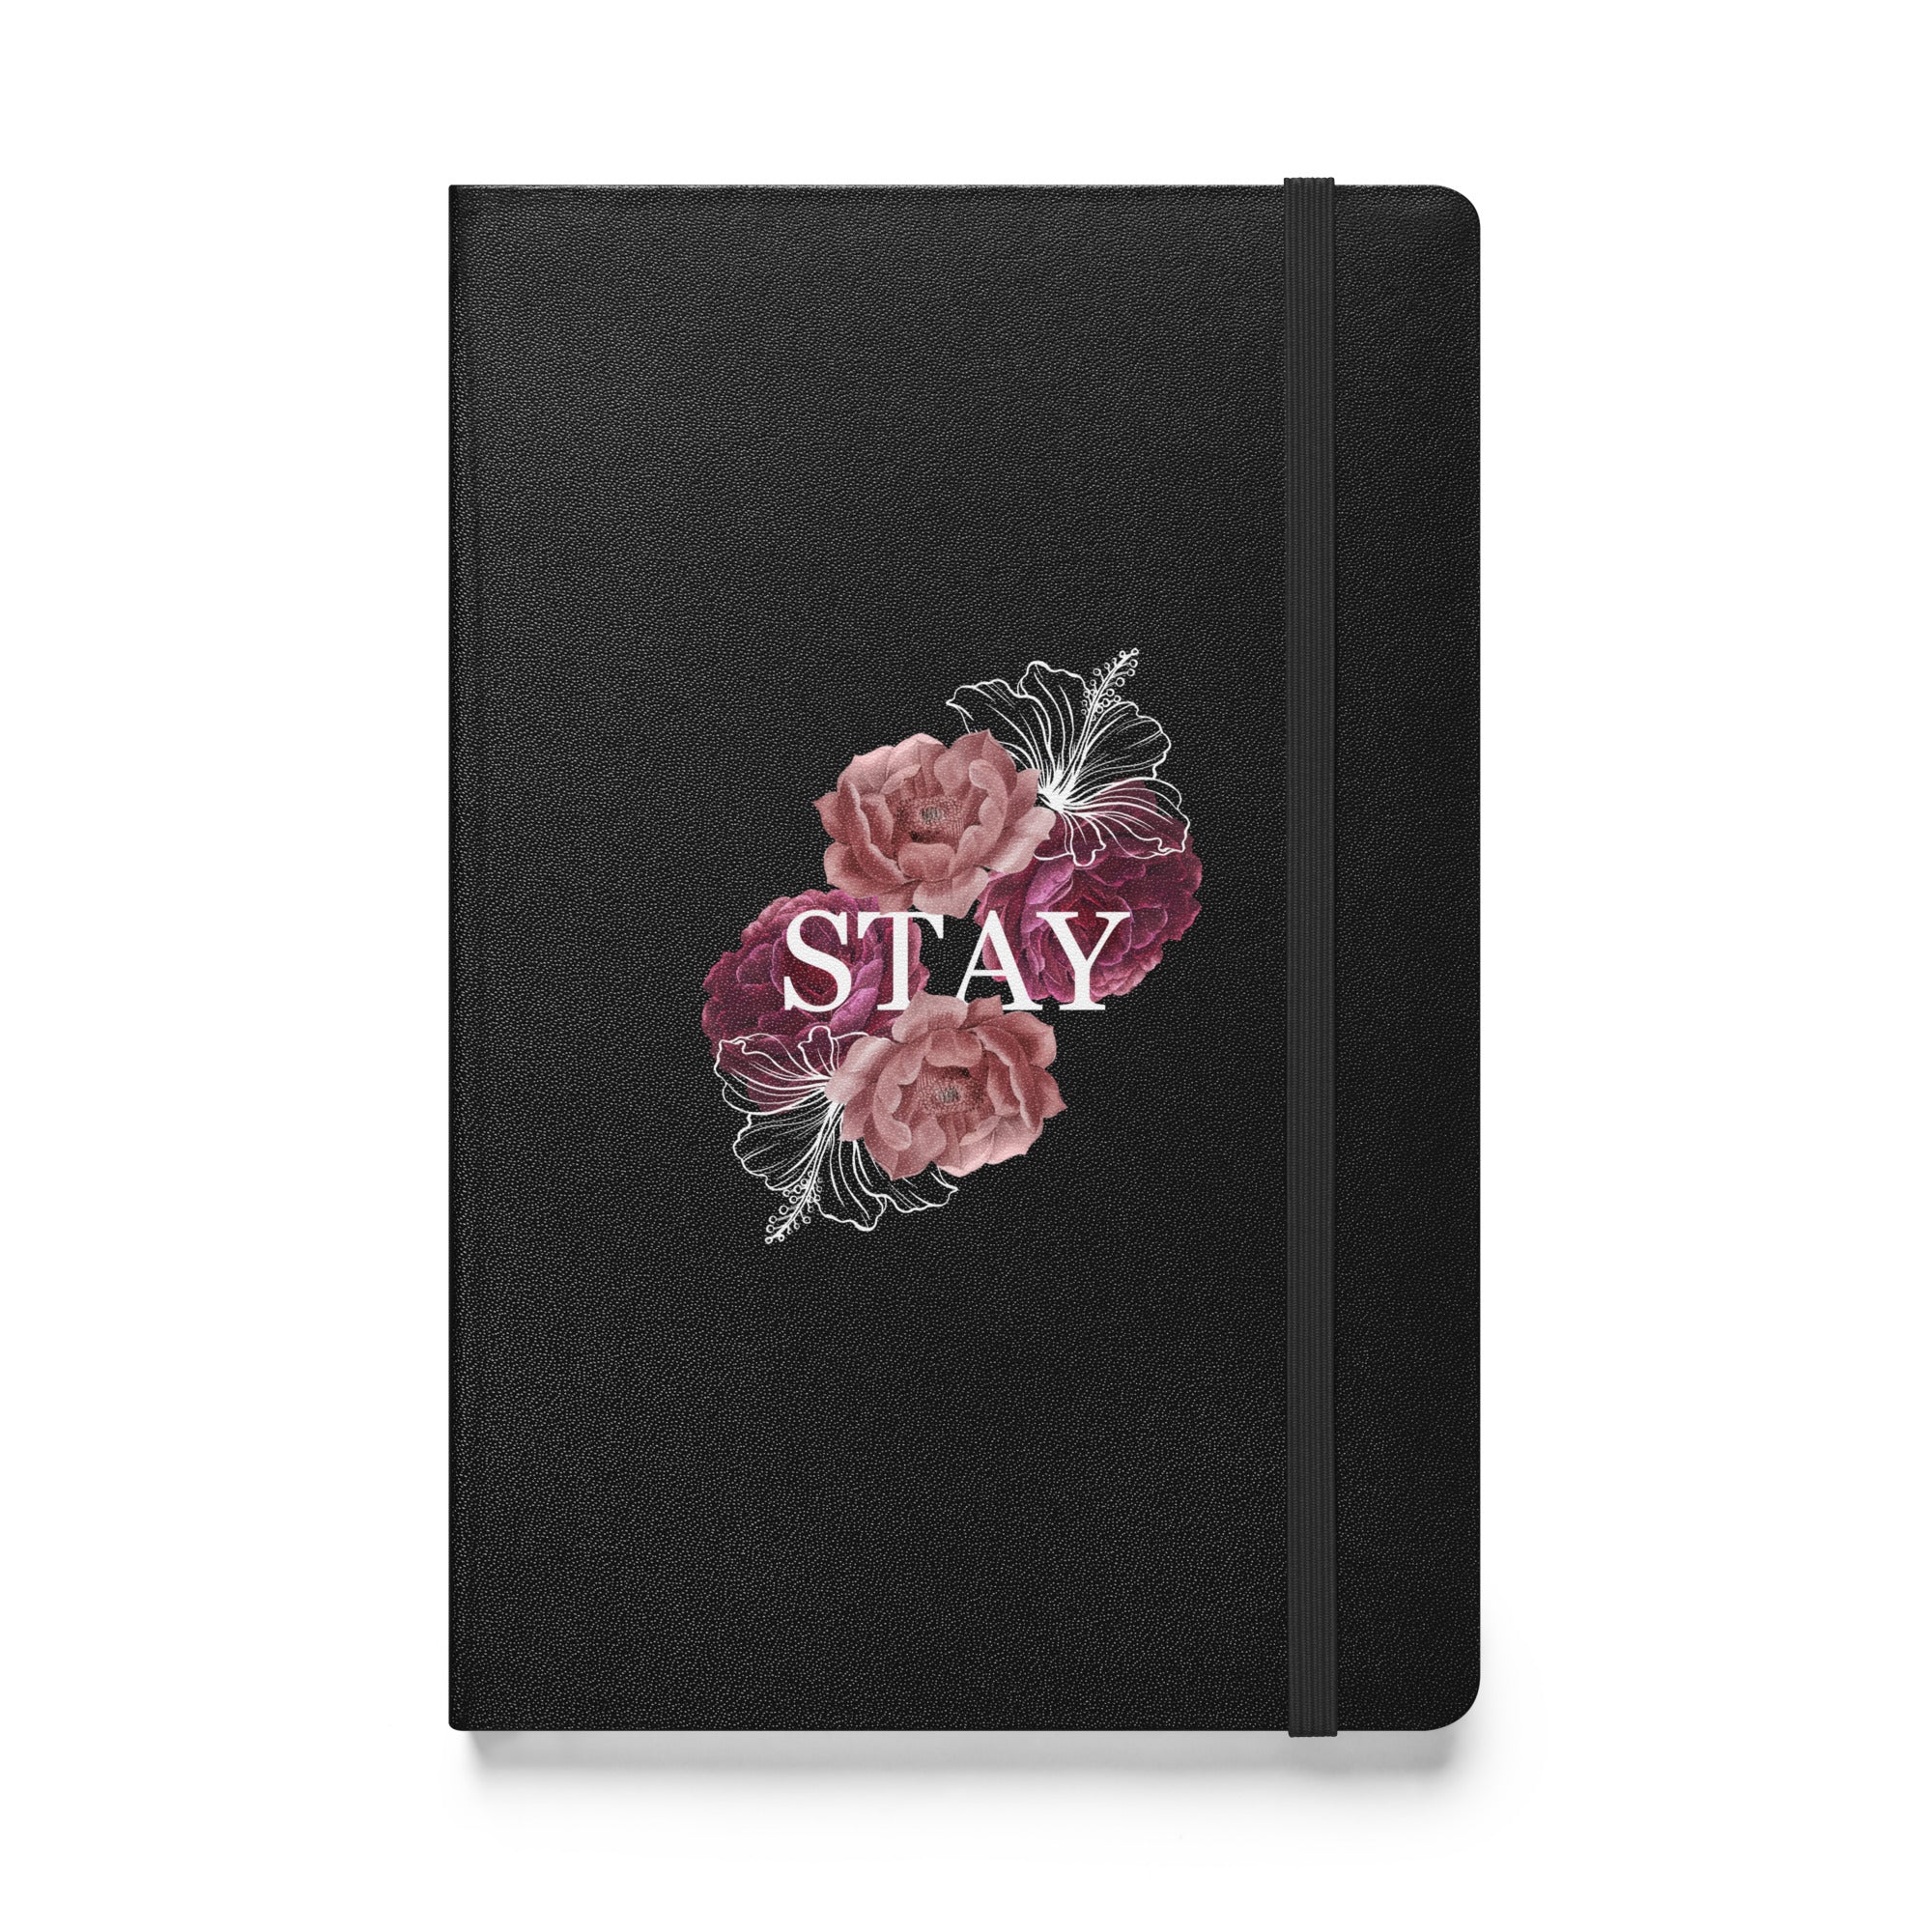 Stay - Hardcover Bound Notebook